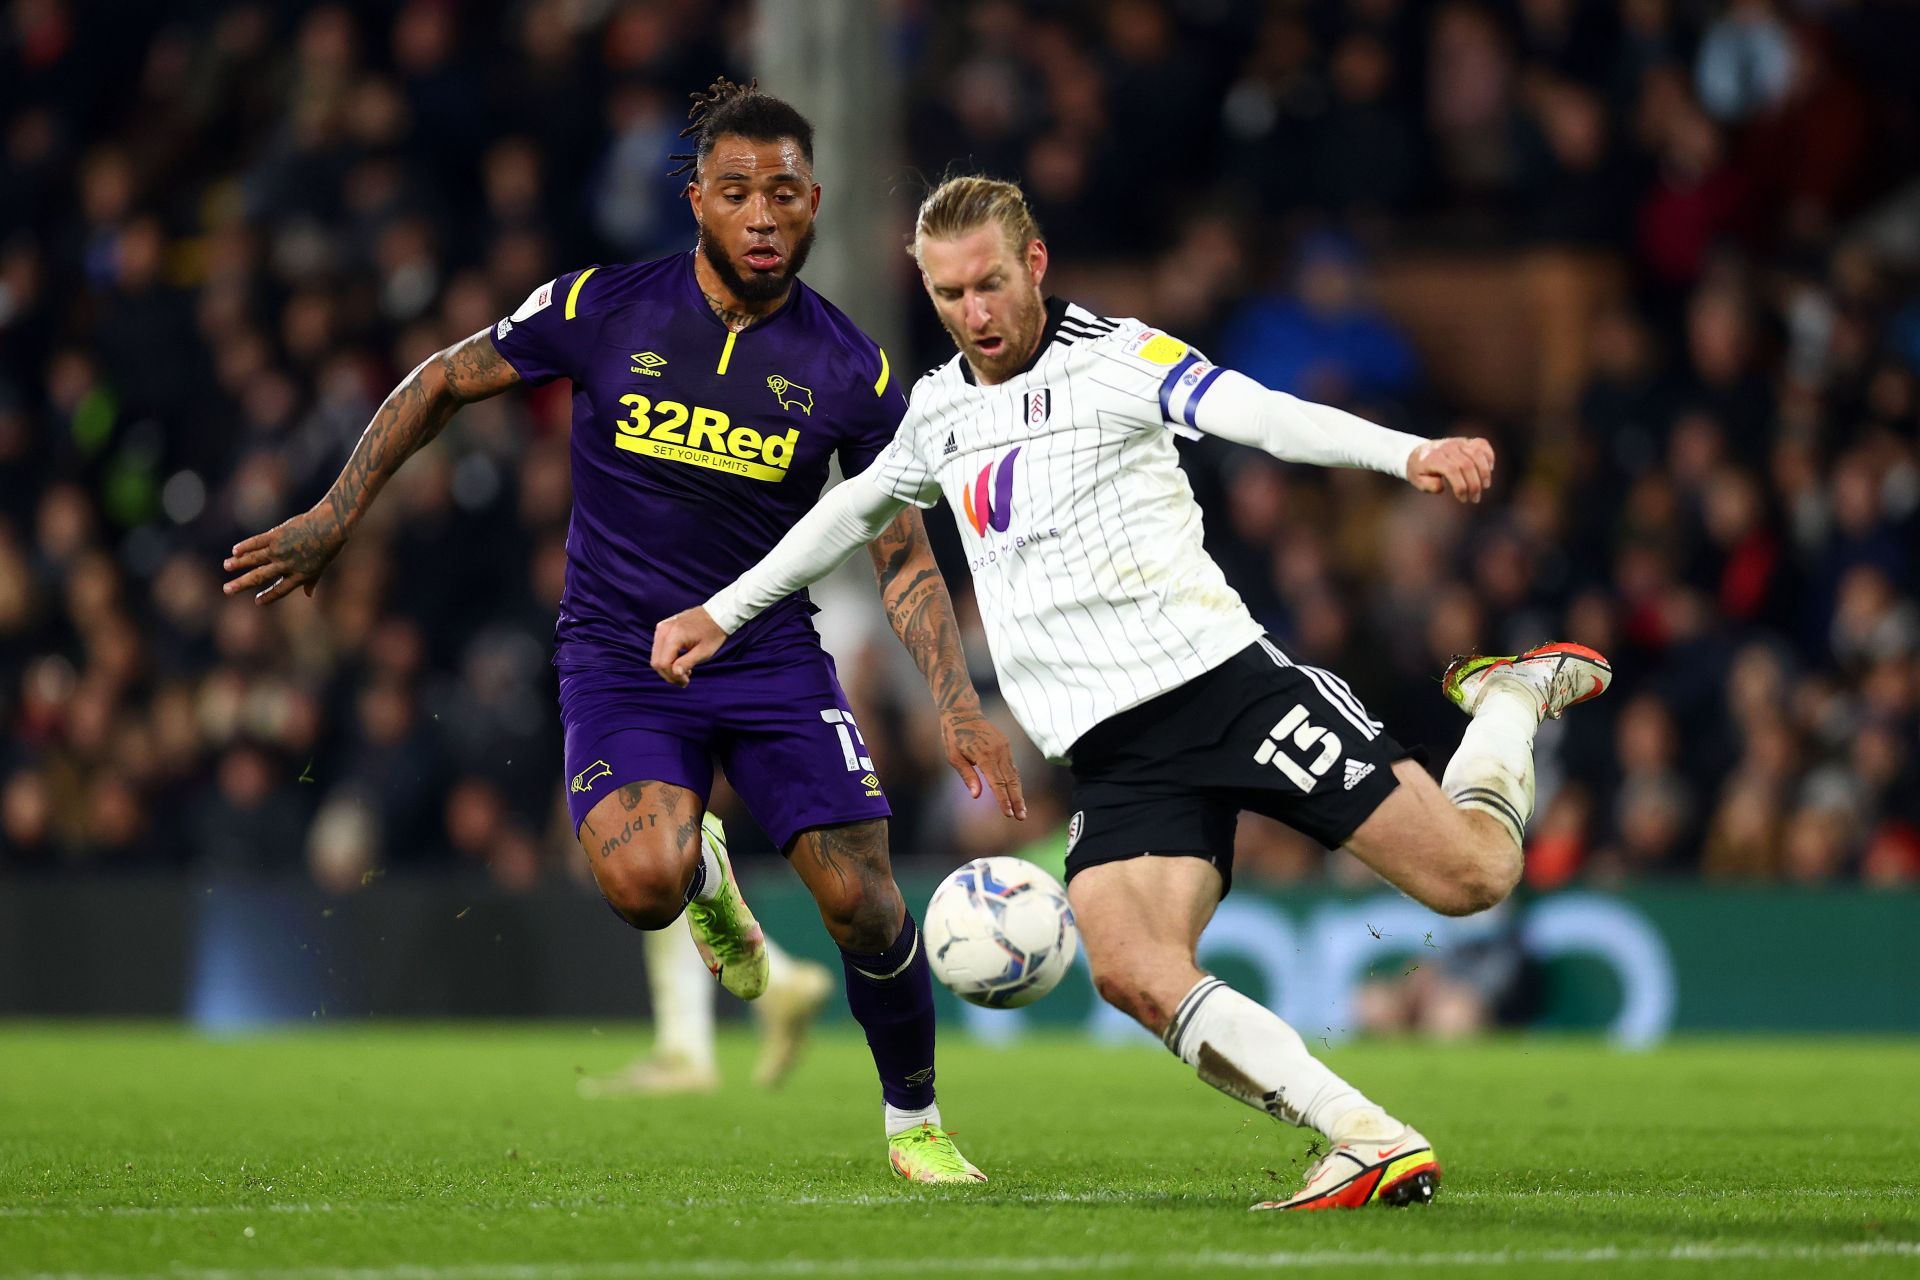 Derby County play host to league leaders Fulham on Friday